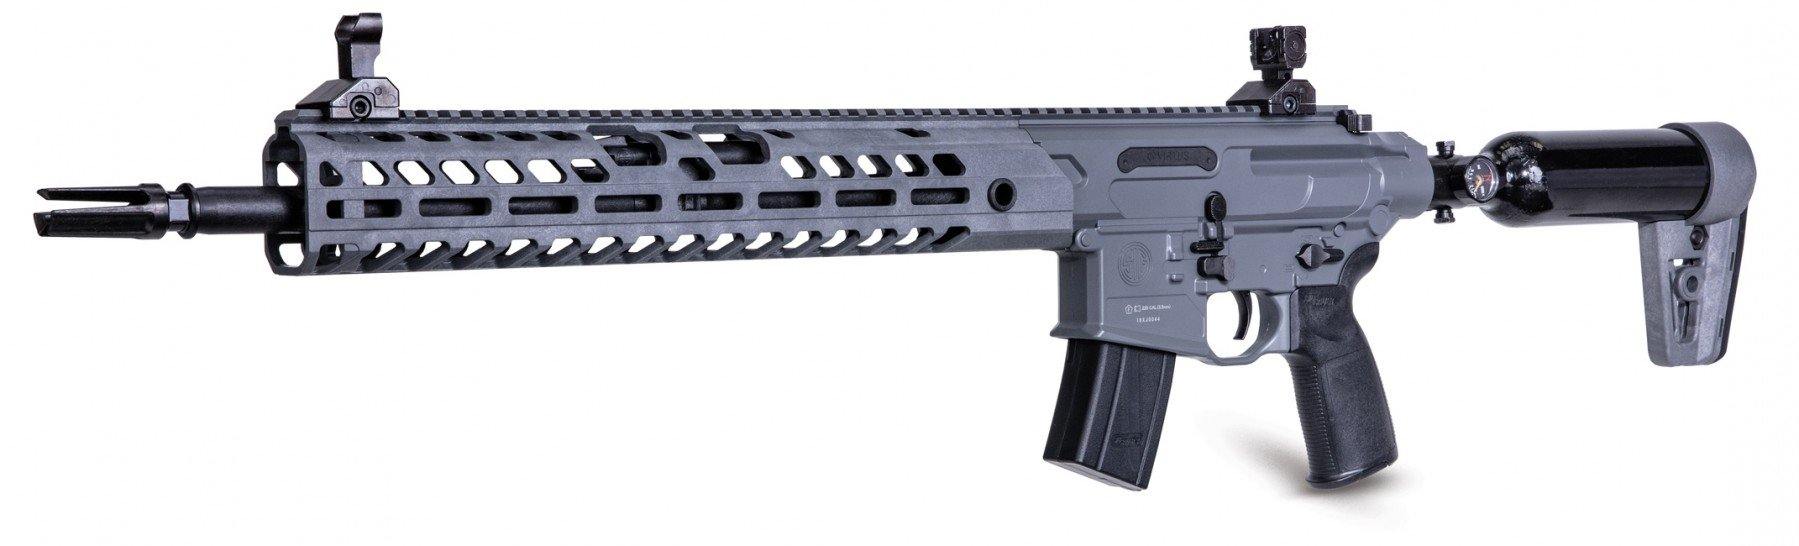 SIG MCX VIRTUS, PCP AIR RIFLE 5.5mm (Pellet) - Security and More